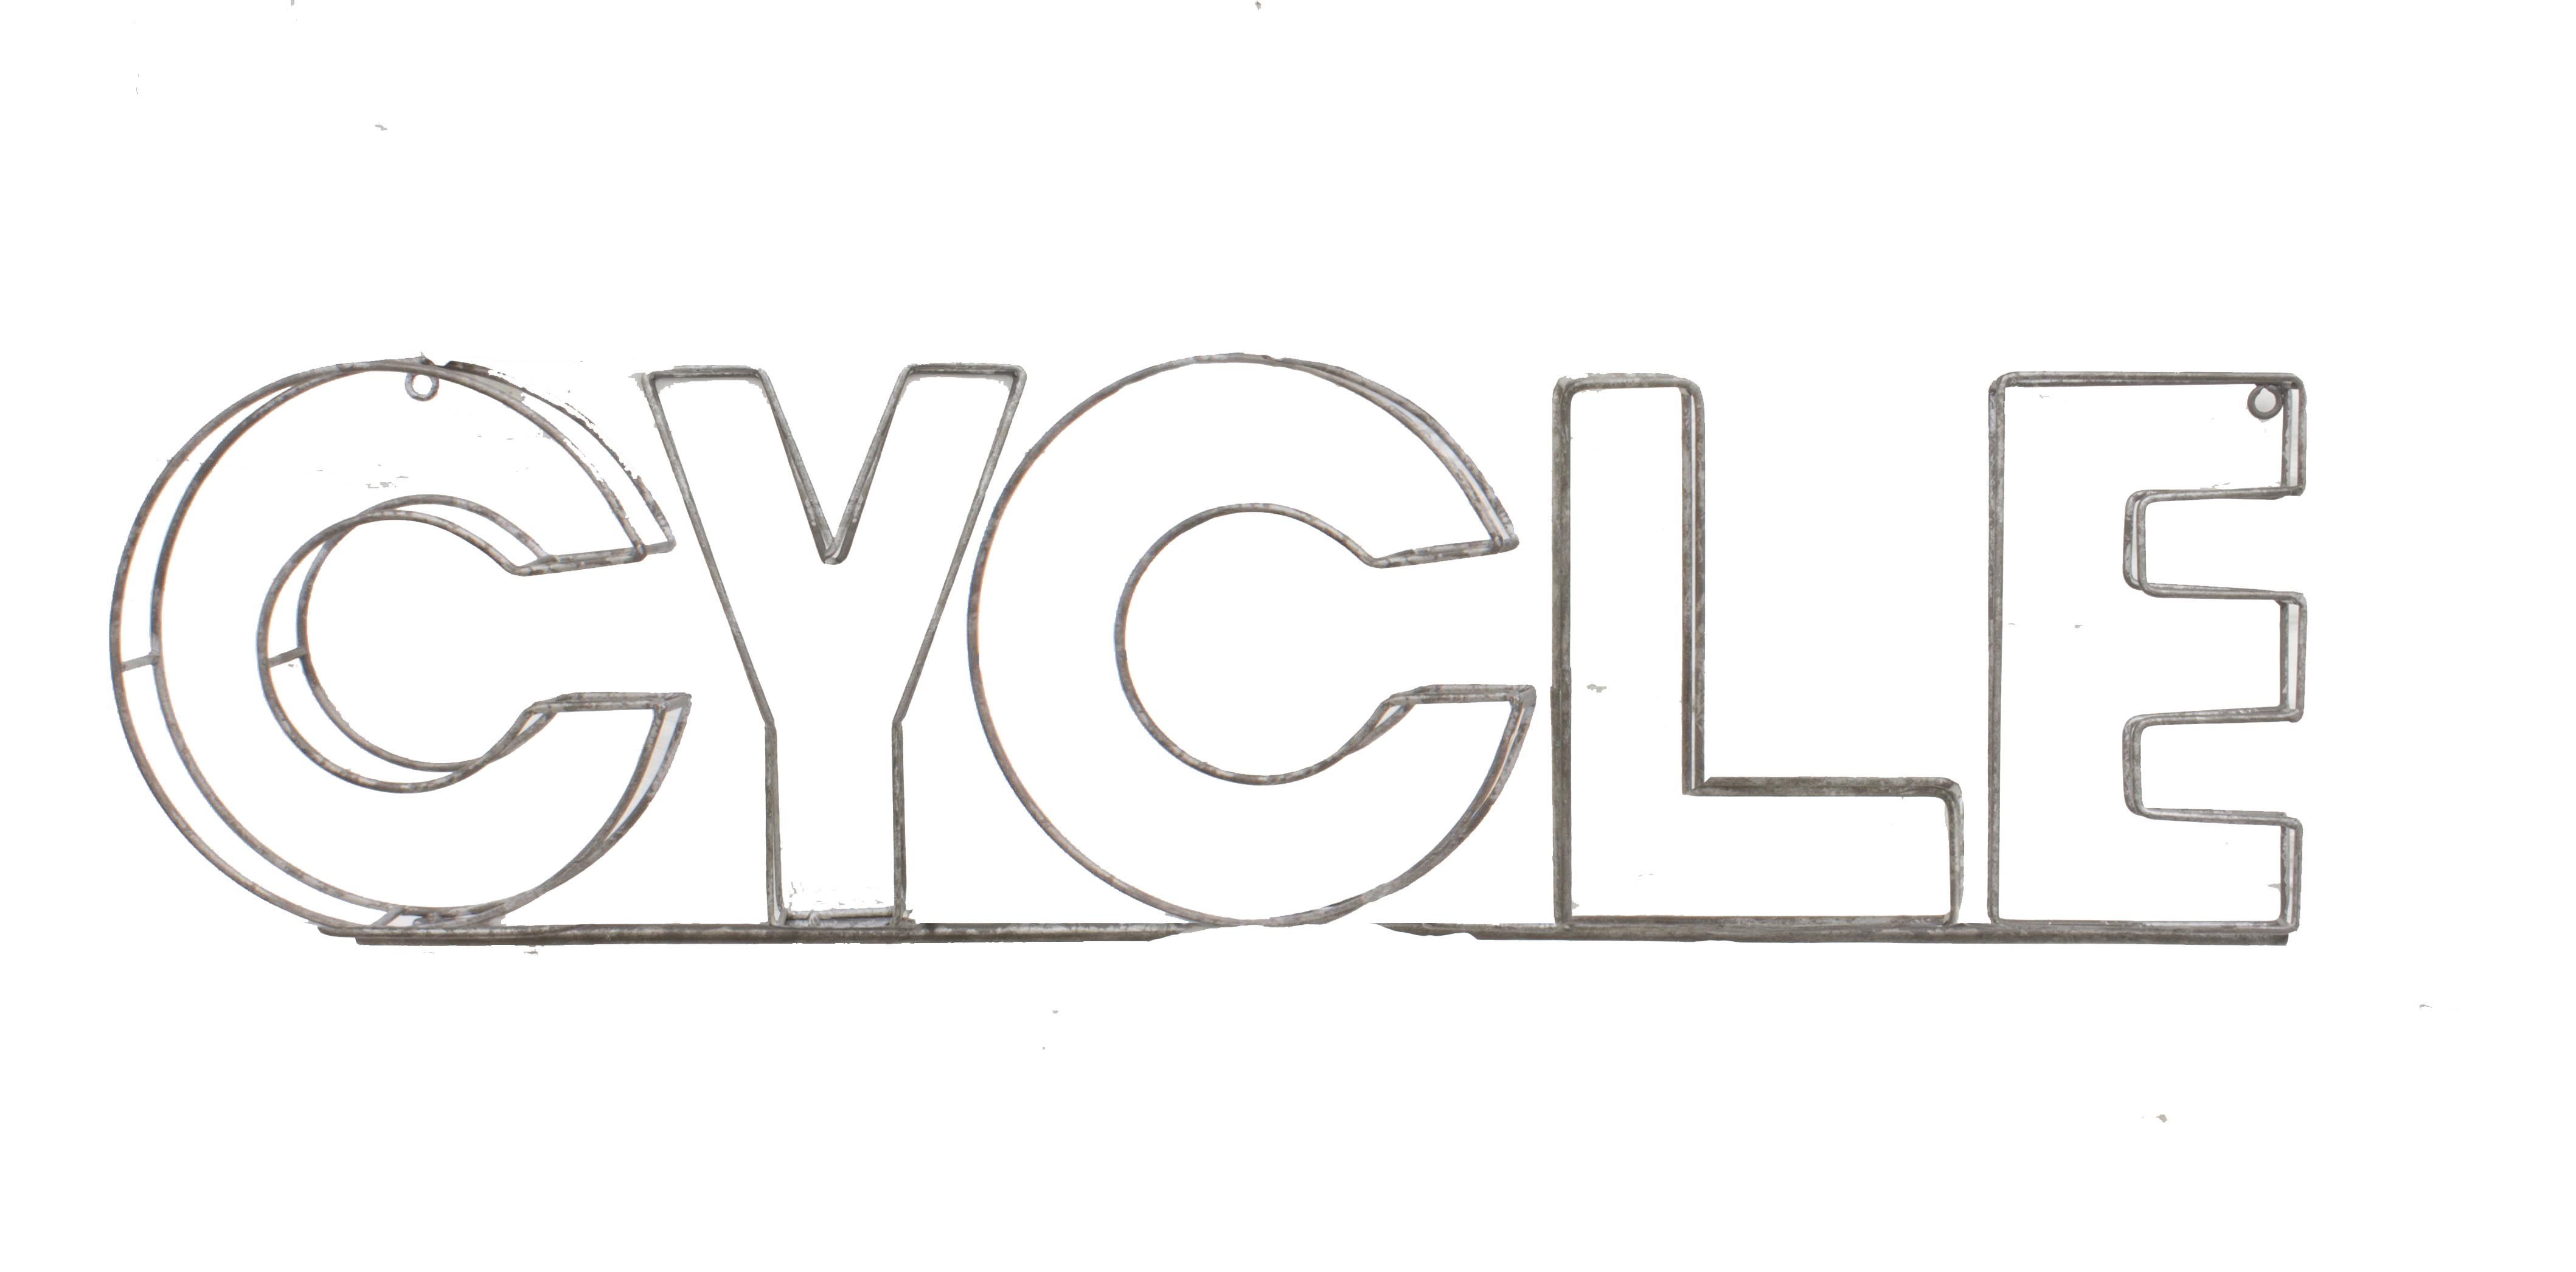 Cycle Wire Sign Parisian Gift